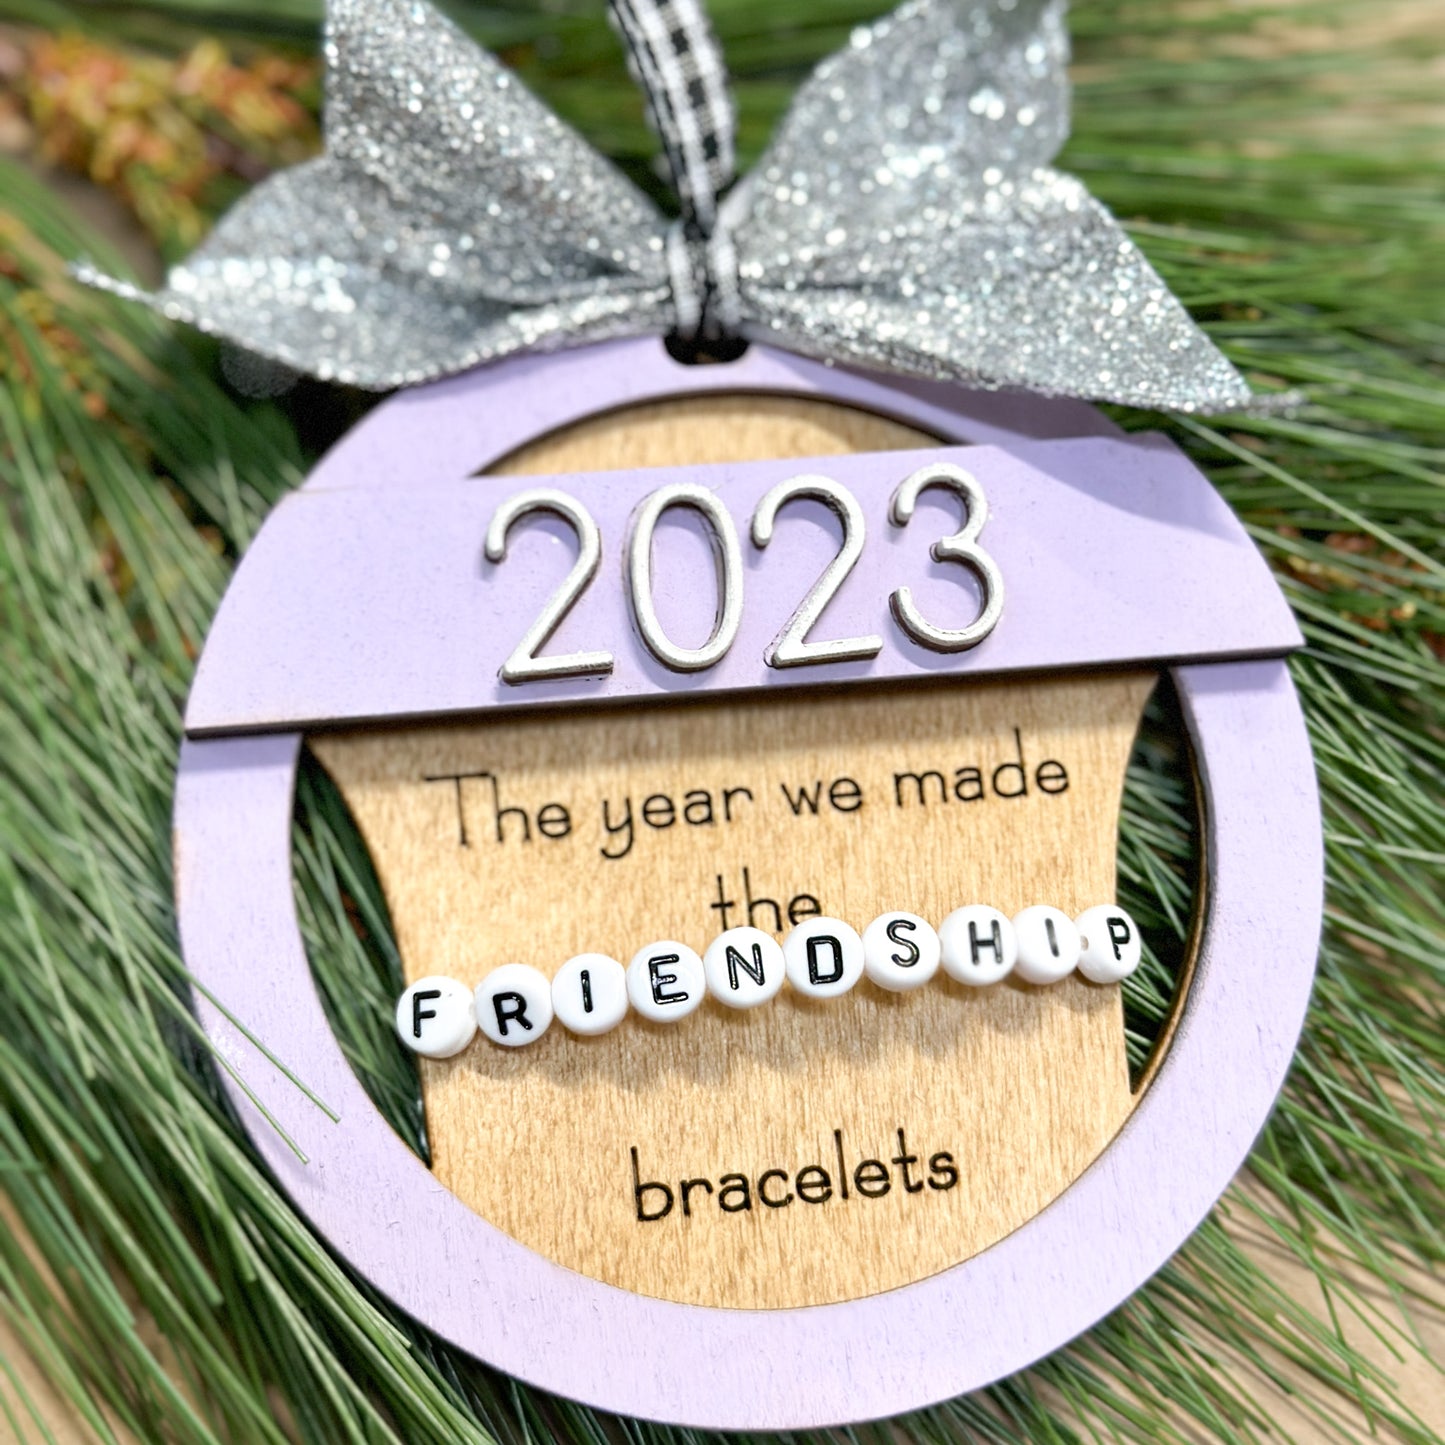 The year we made Friendship Bracelets Ornament P02960